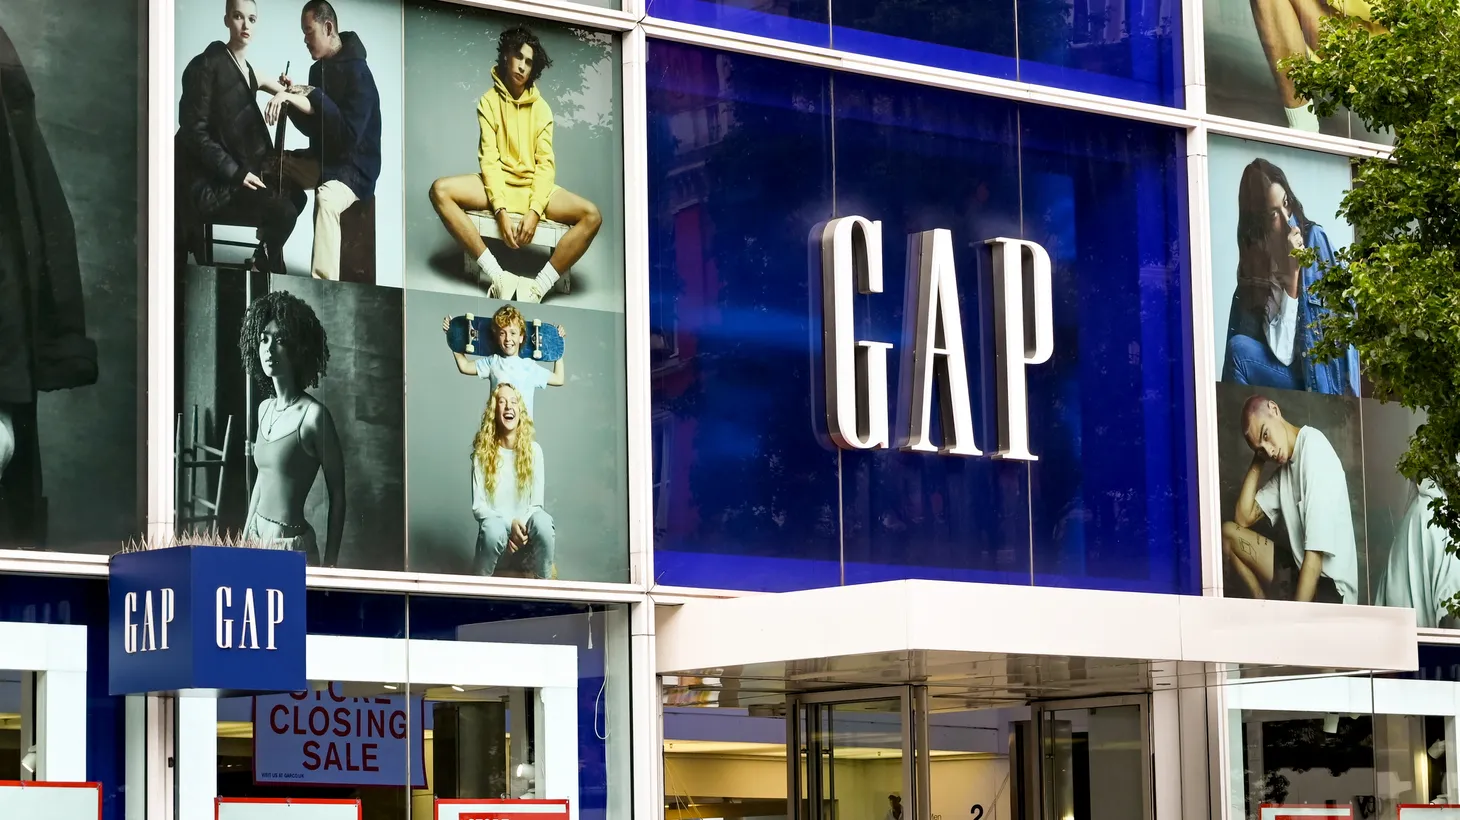 Gap became of the largest clothing retailers in the world, eventually buying Banana Republic, Old Navy, and Athleta. But long gone are the days when it was a cool trendsetter.